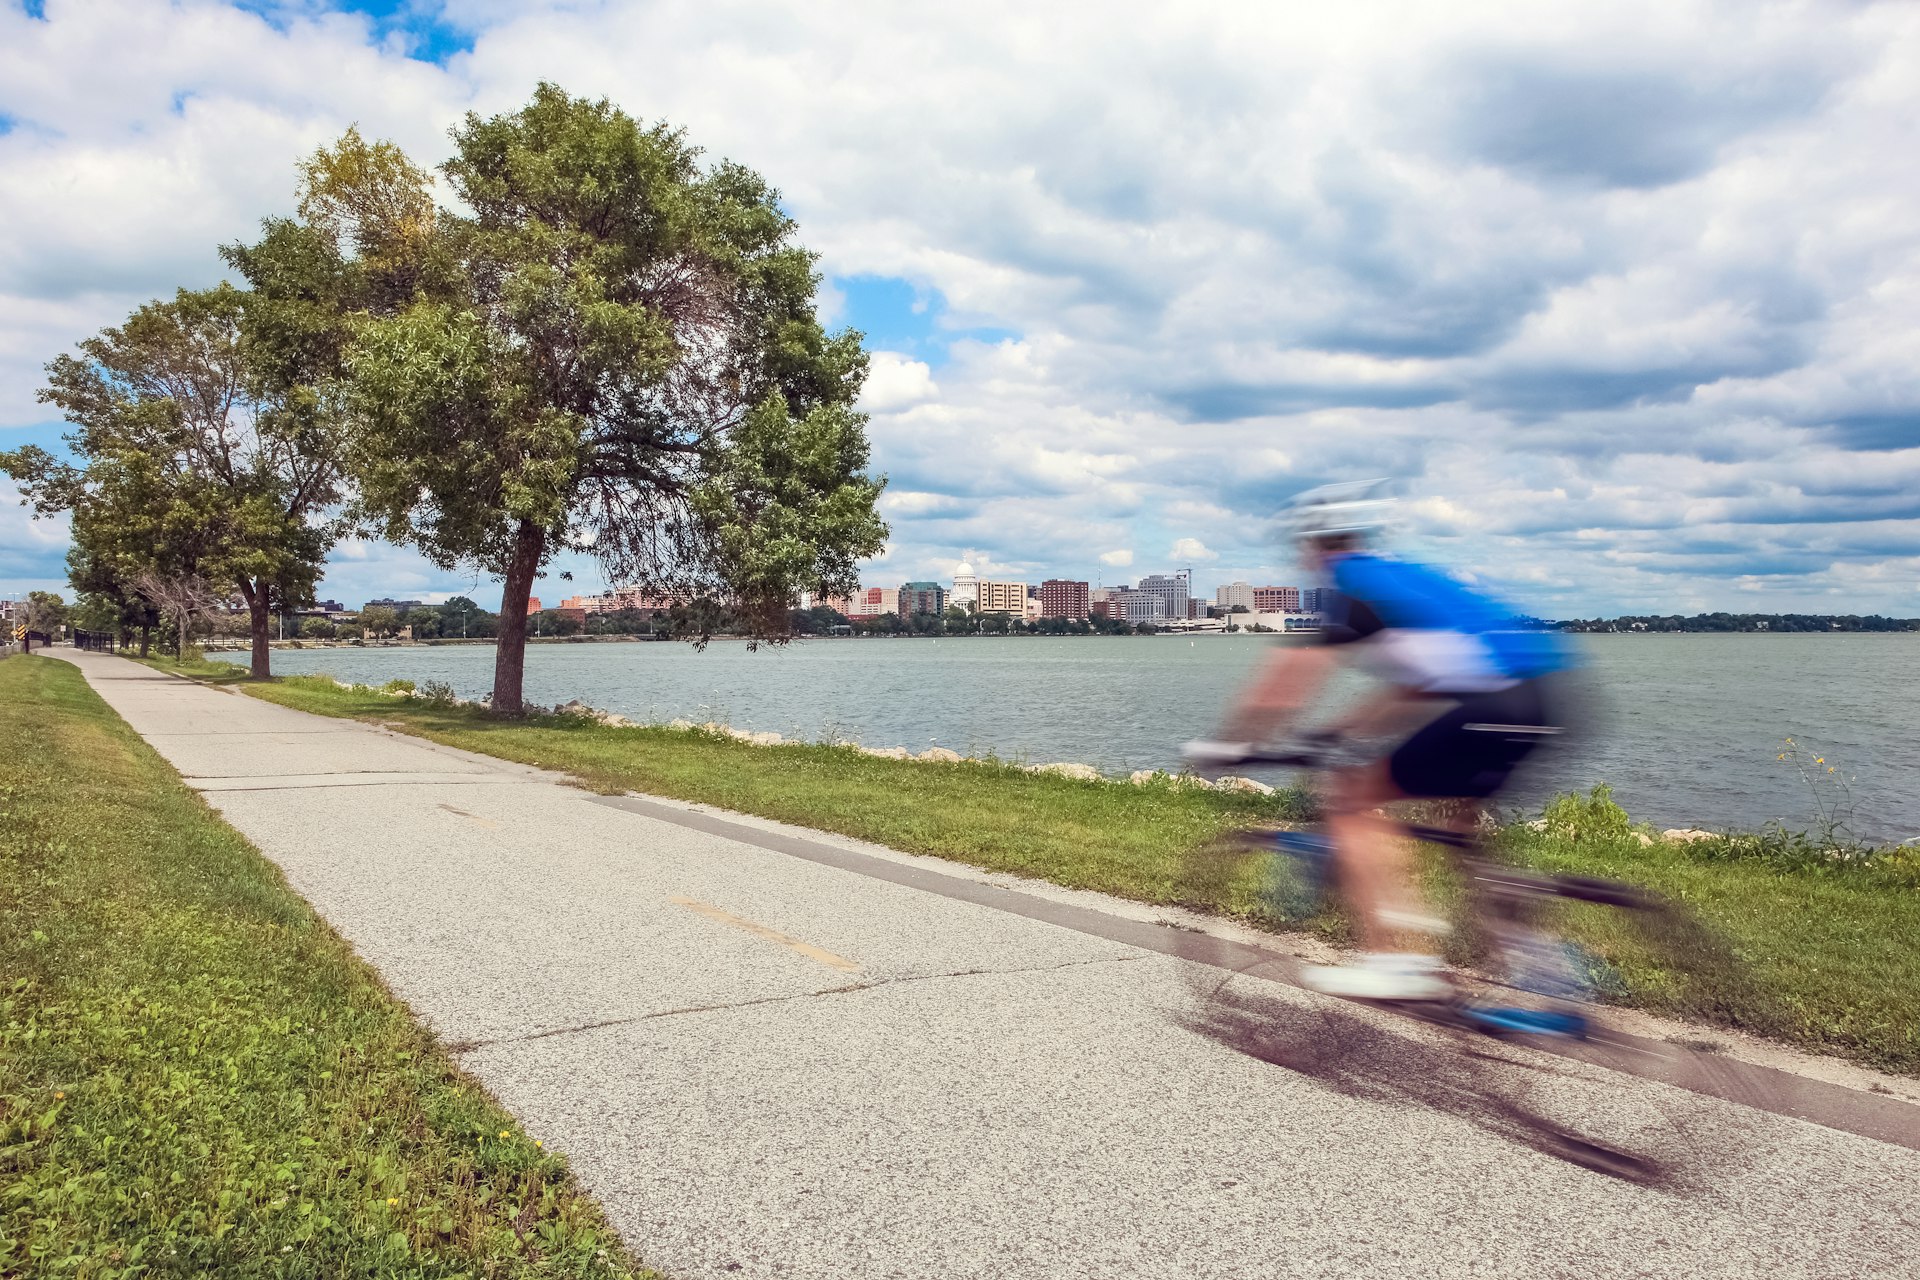 Motion blur of a person riding a bicycle on a lakeside bike path in Madison, Wisconsin with green trees and grass